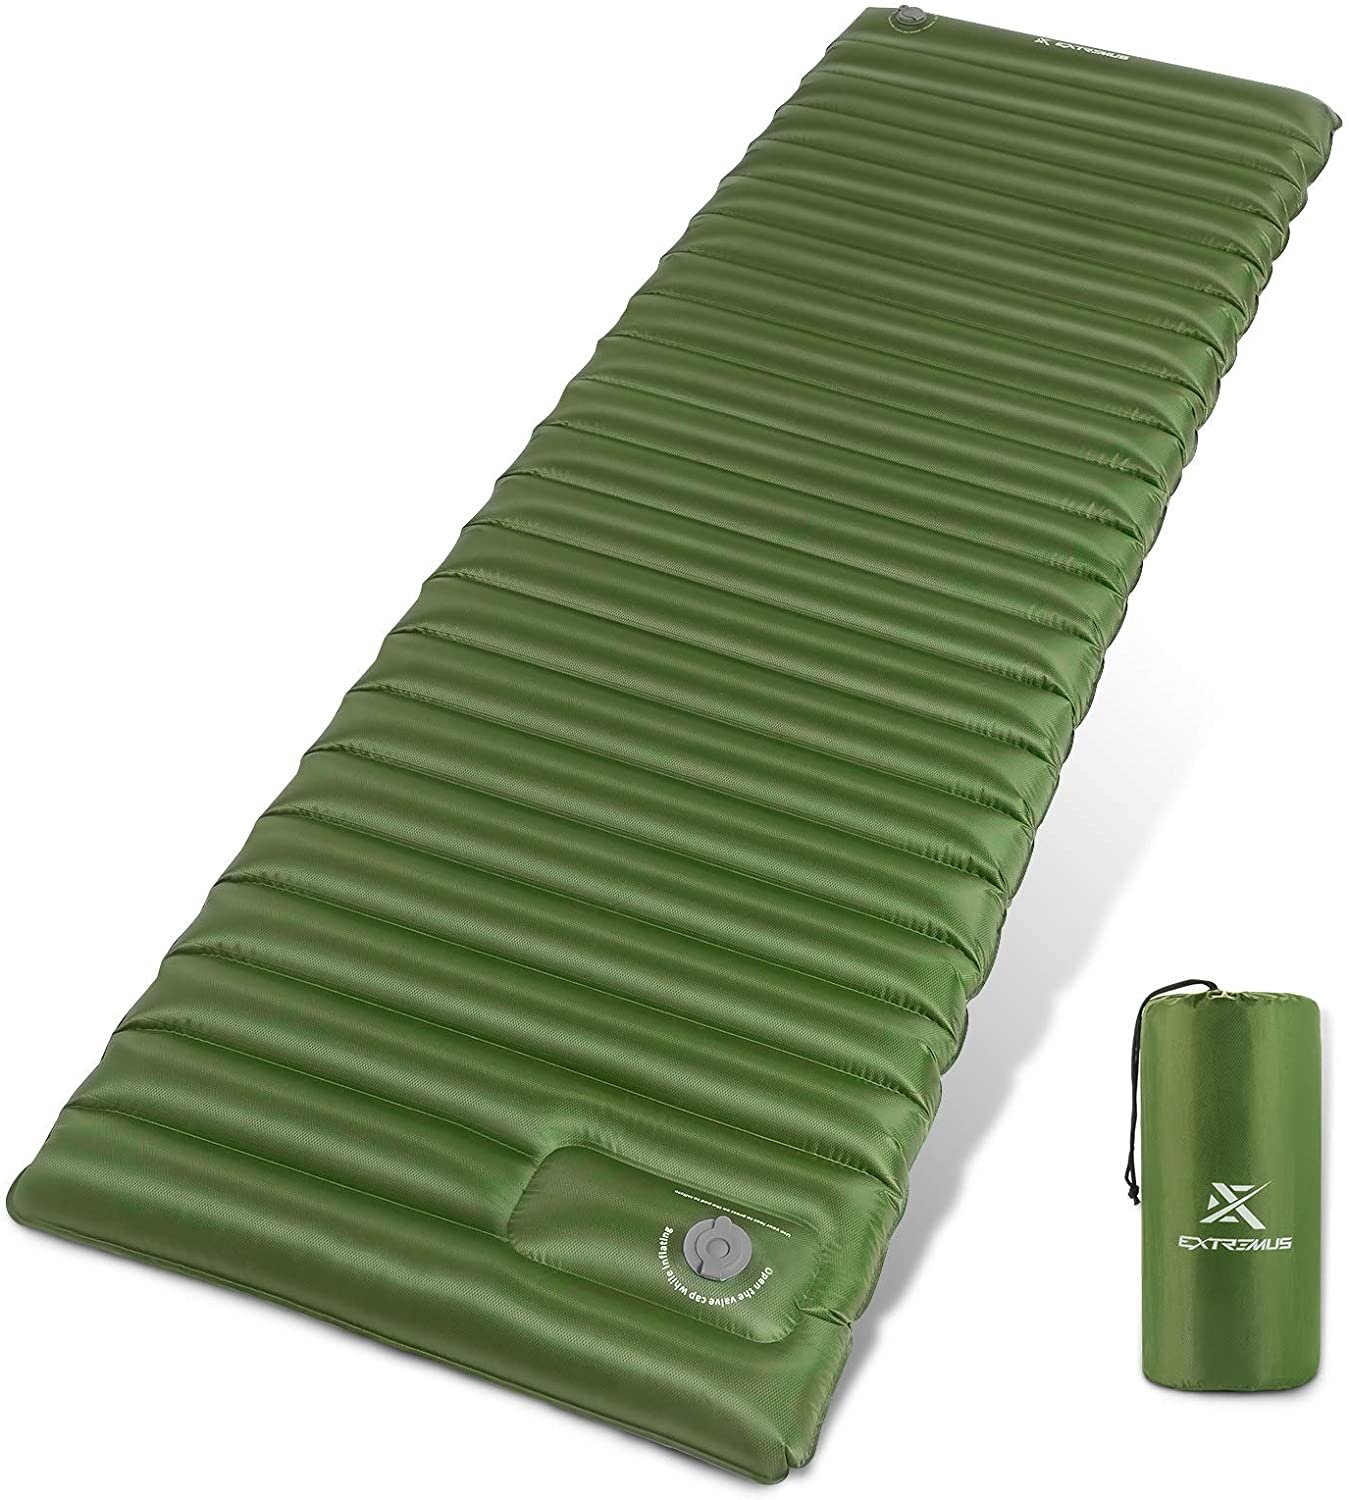 Inflatable Comfort Camping Mattress 2 Person Ripstop Sleeping mat for Backpacking Portable Waterproof Camping Pad with Pump Sack Hikenture Ultralight Double Sleeping Pad for Camping 